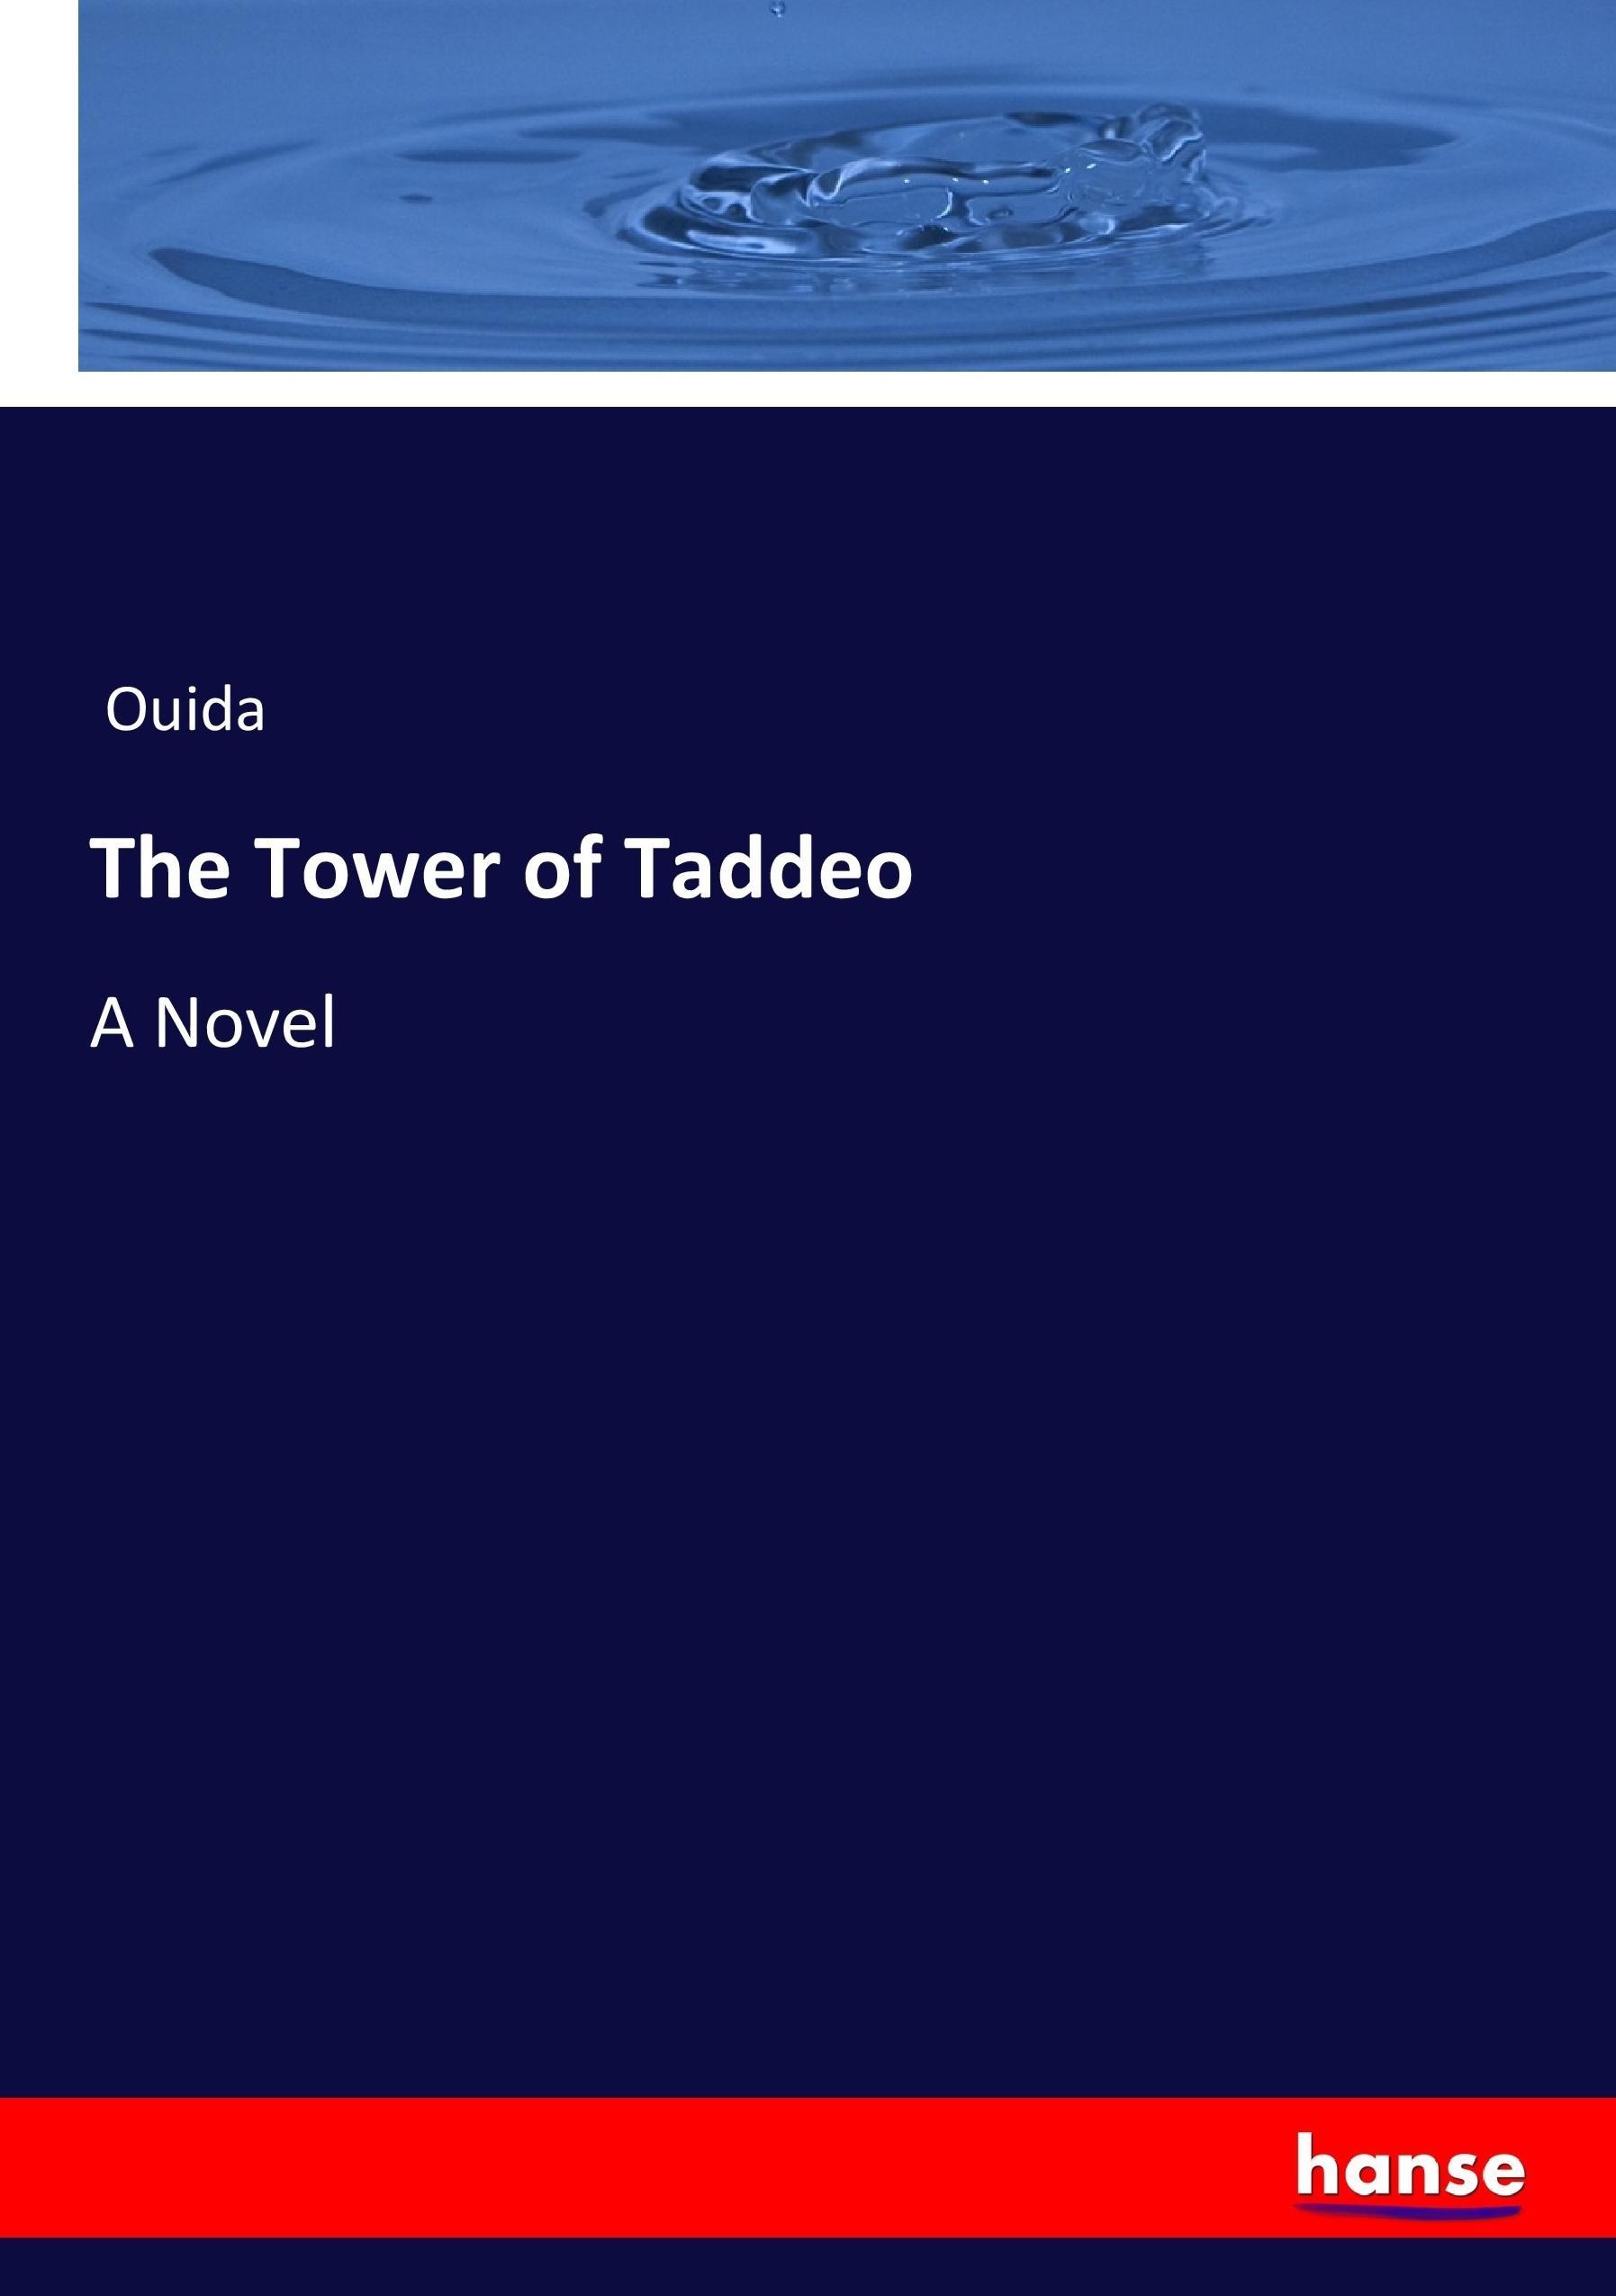 The Tower of Taddeo | A Novel | Ouida | Taschenbuch | Paperback | 340 S. | Englisch | 2017 | hansebooks | EAN 9783337029357 - Ouida